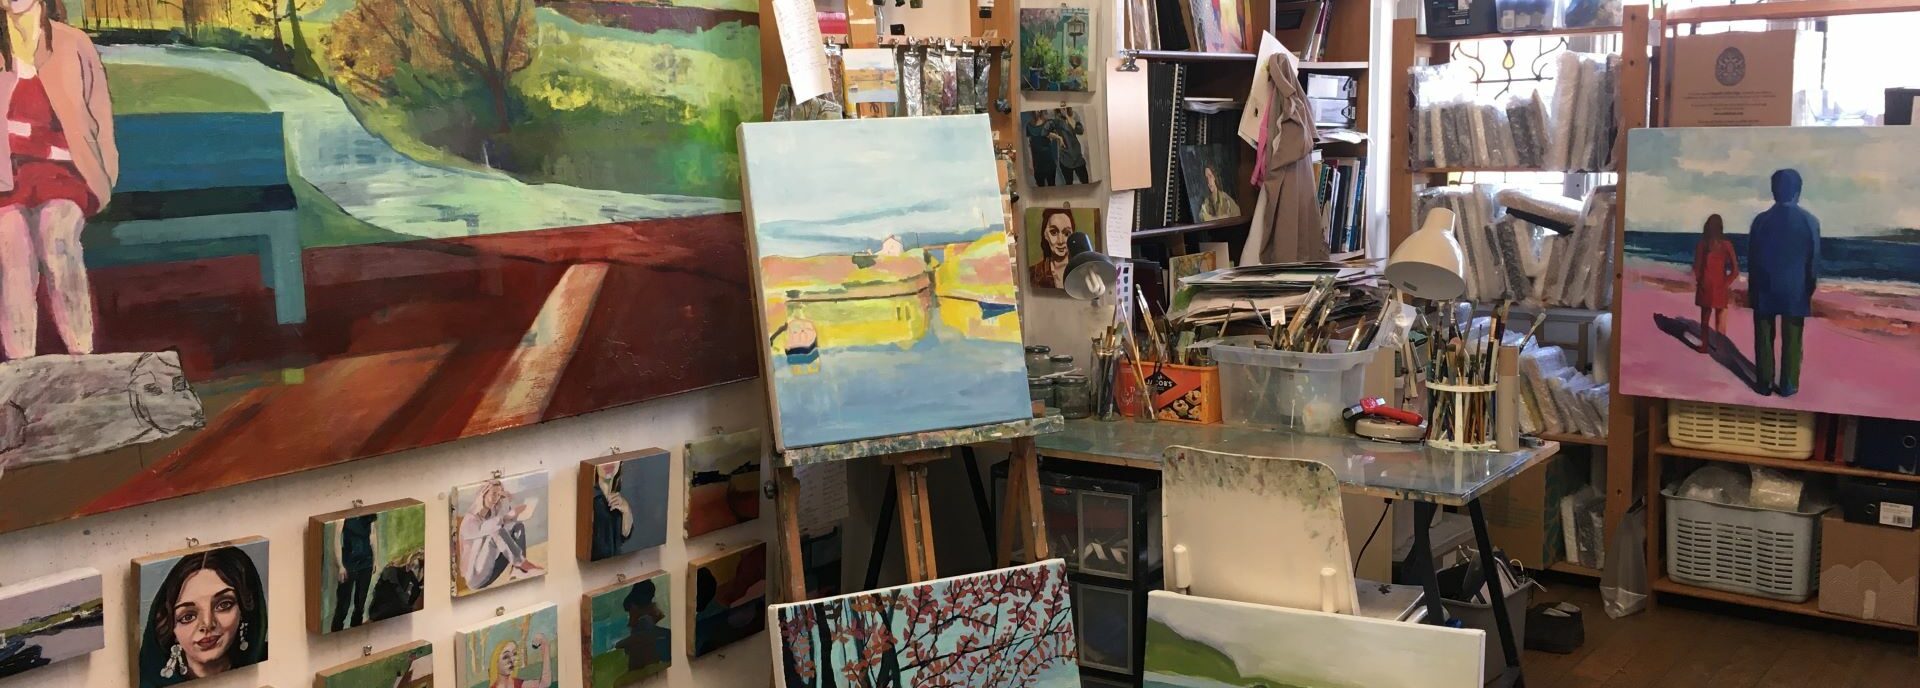 A studio with artwork hung up on the walls, an easel and other objects